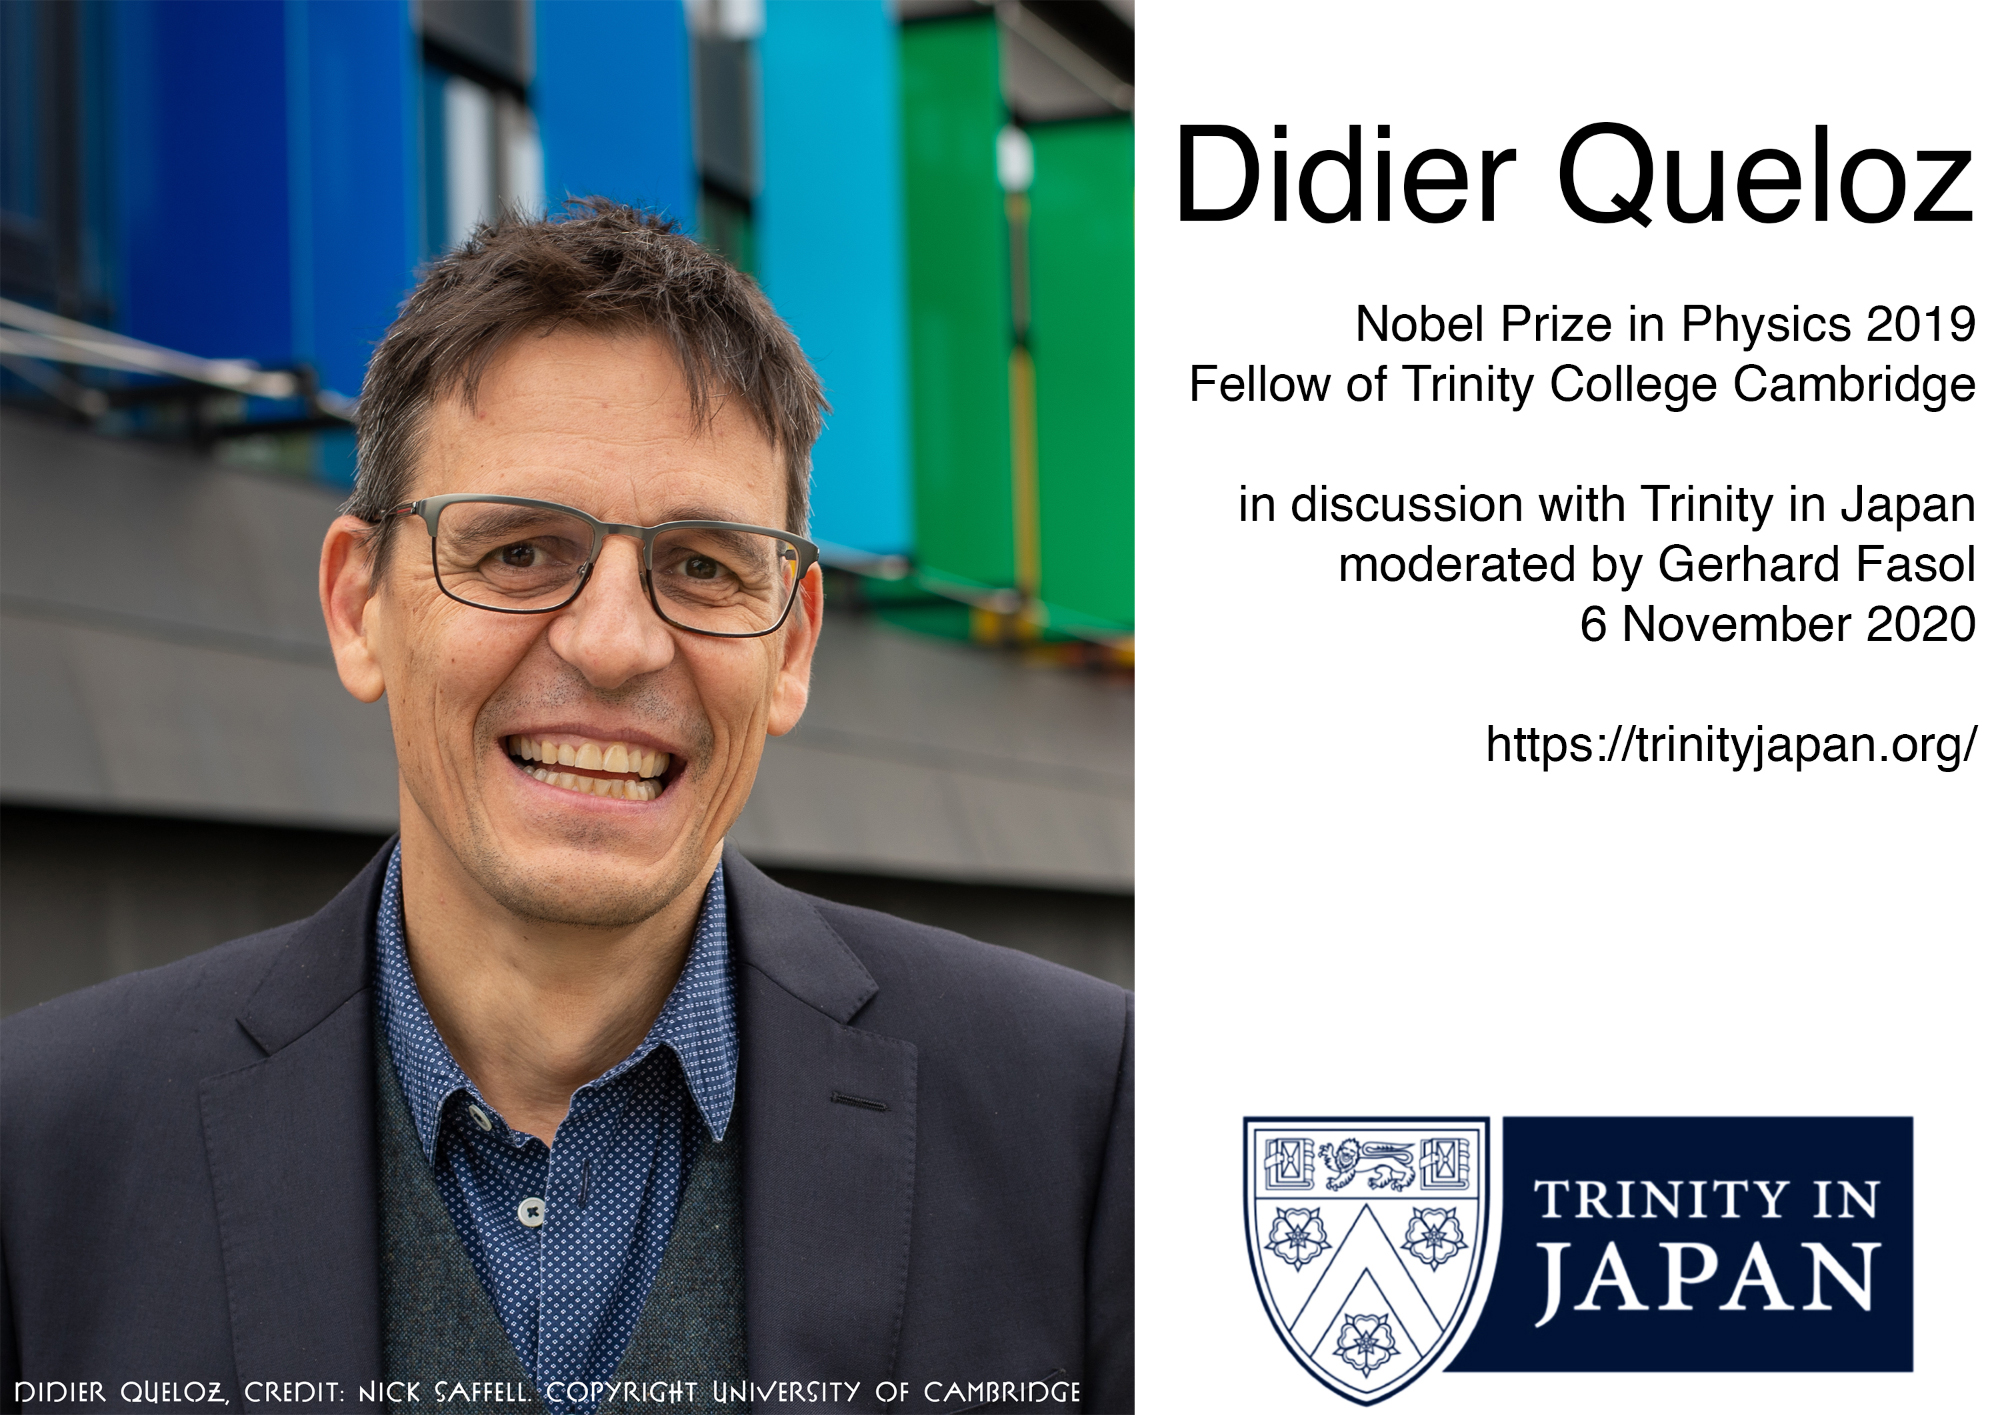 [Trinity Japan] Didier Queloz, Nobel Prize in Physics 2019, on exoplanets and extraterrestrial life, 6 Nov 2020